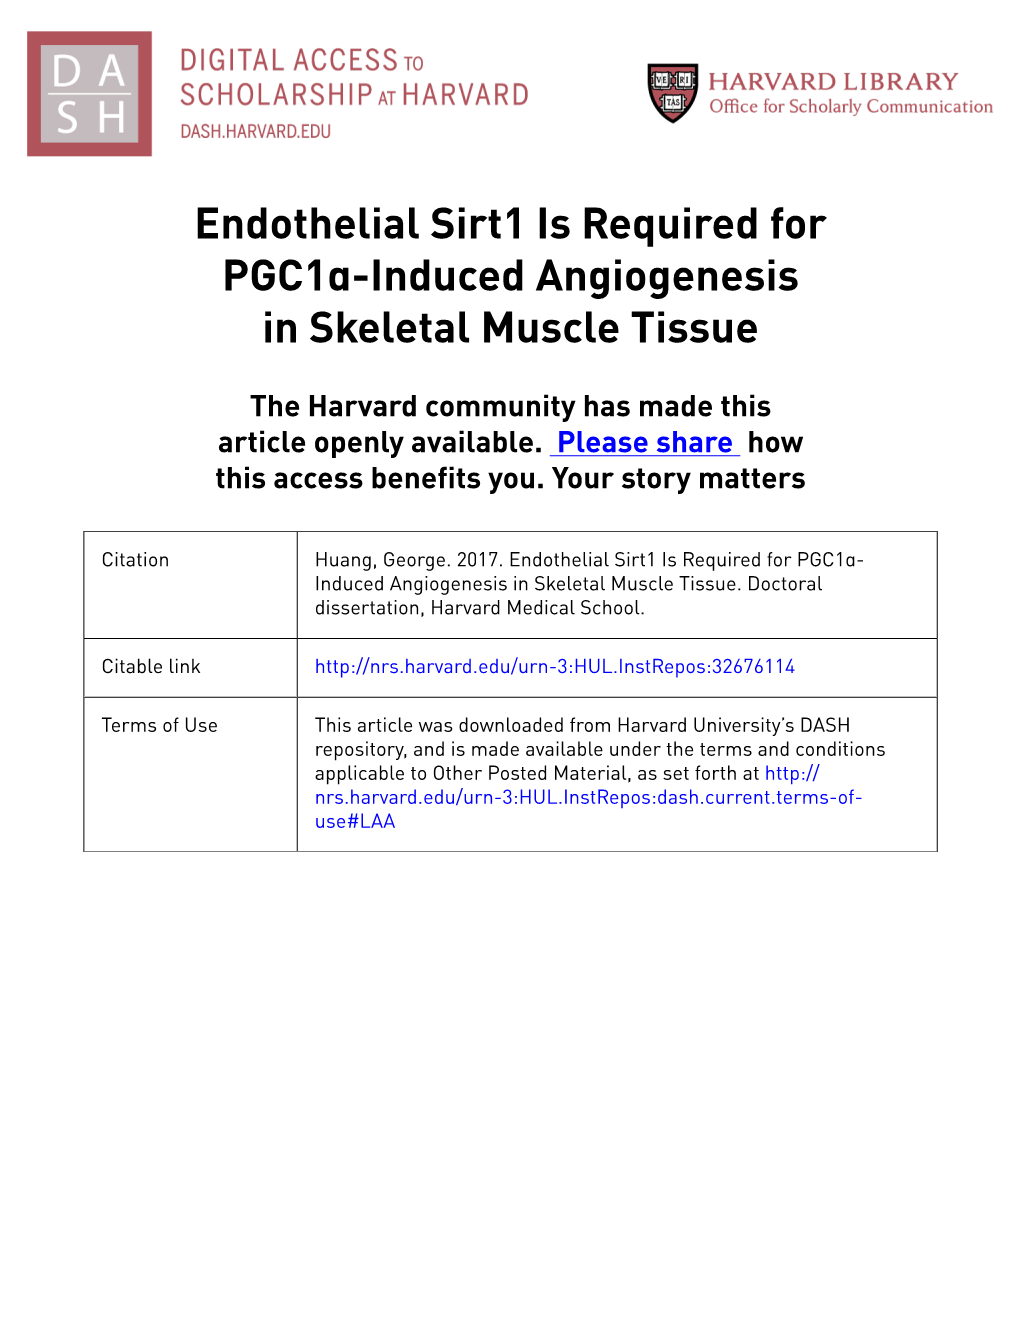 Endothelial Sirt1 Is Required for Pgc1α-Induced Angiogenesis in Skeletal Muscle Tissue